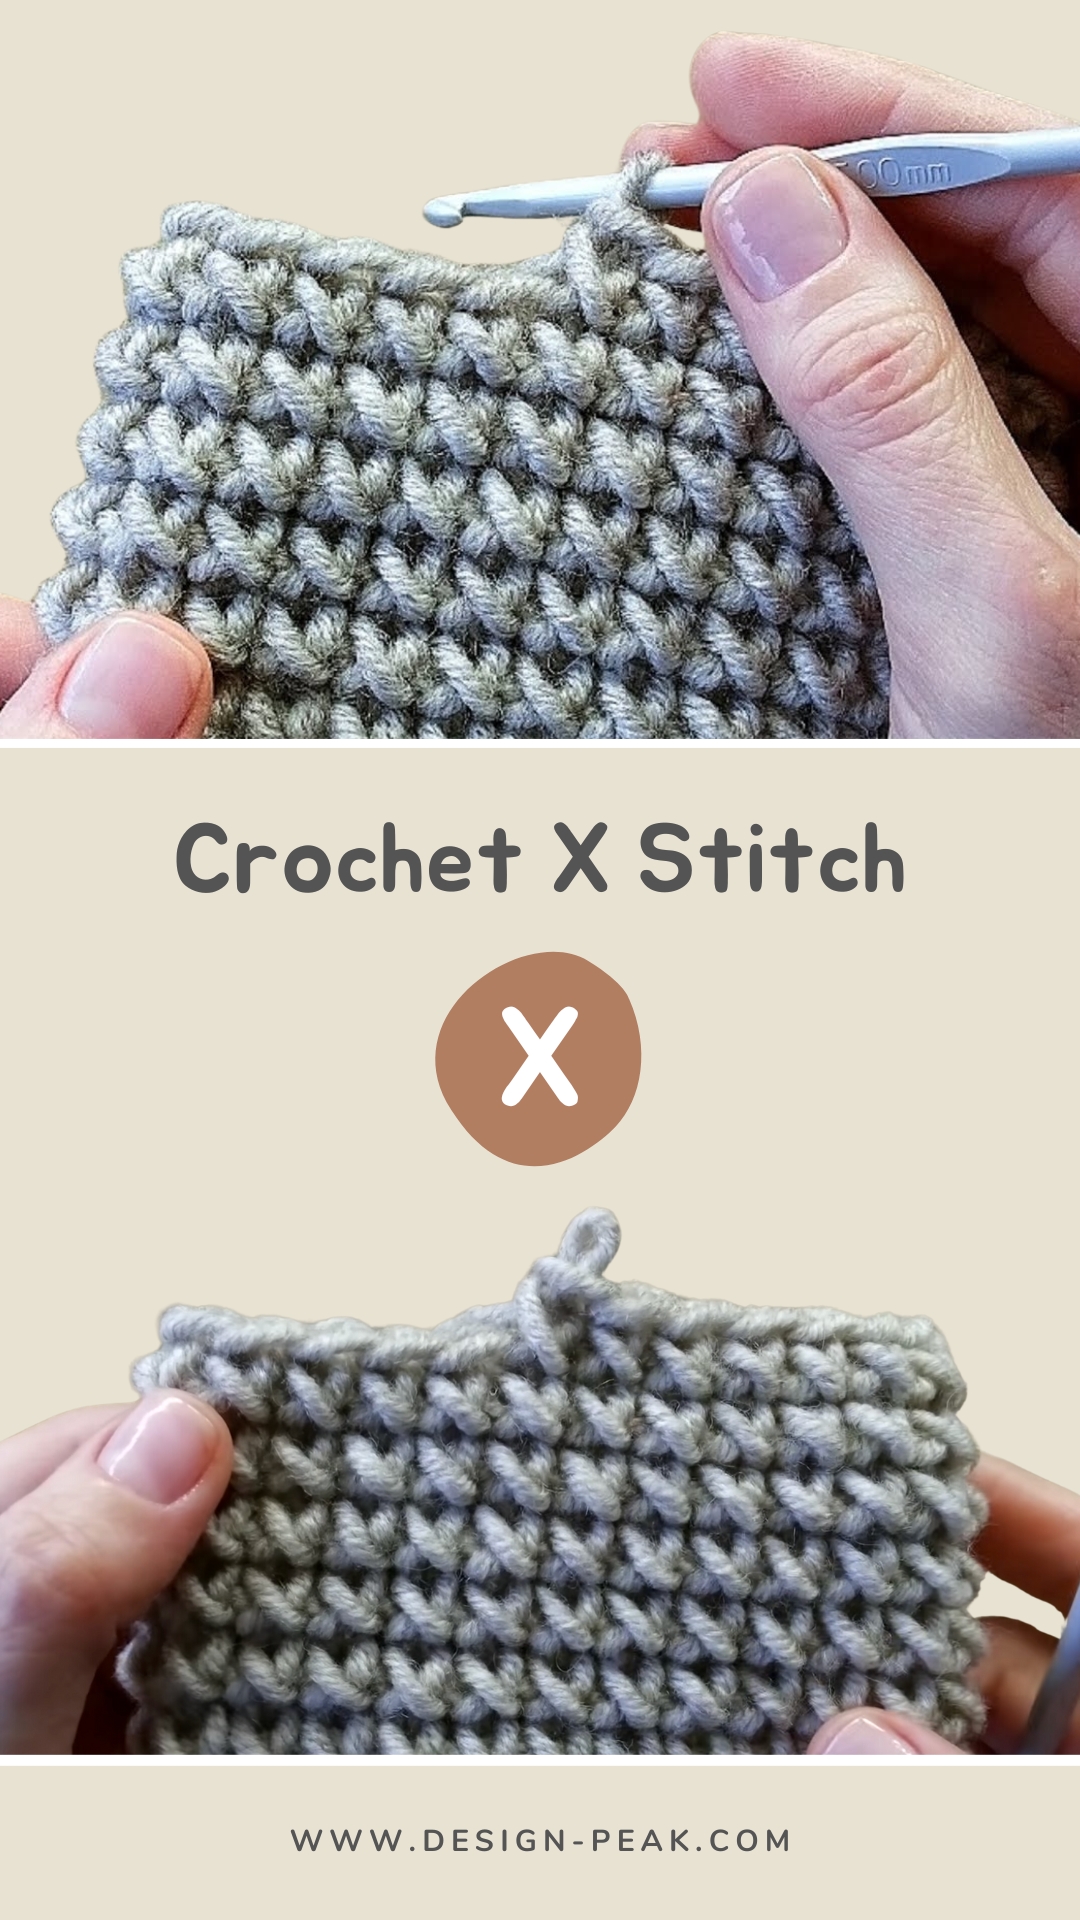 Revisiting the Crocheted X Stitch